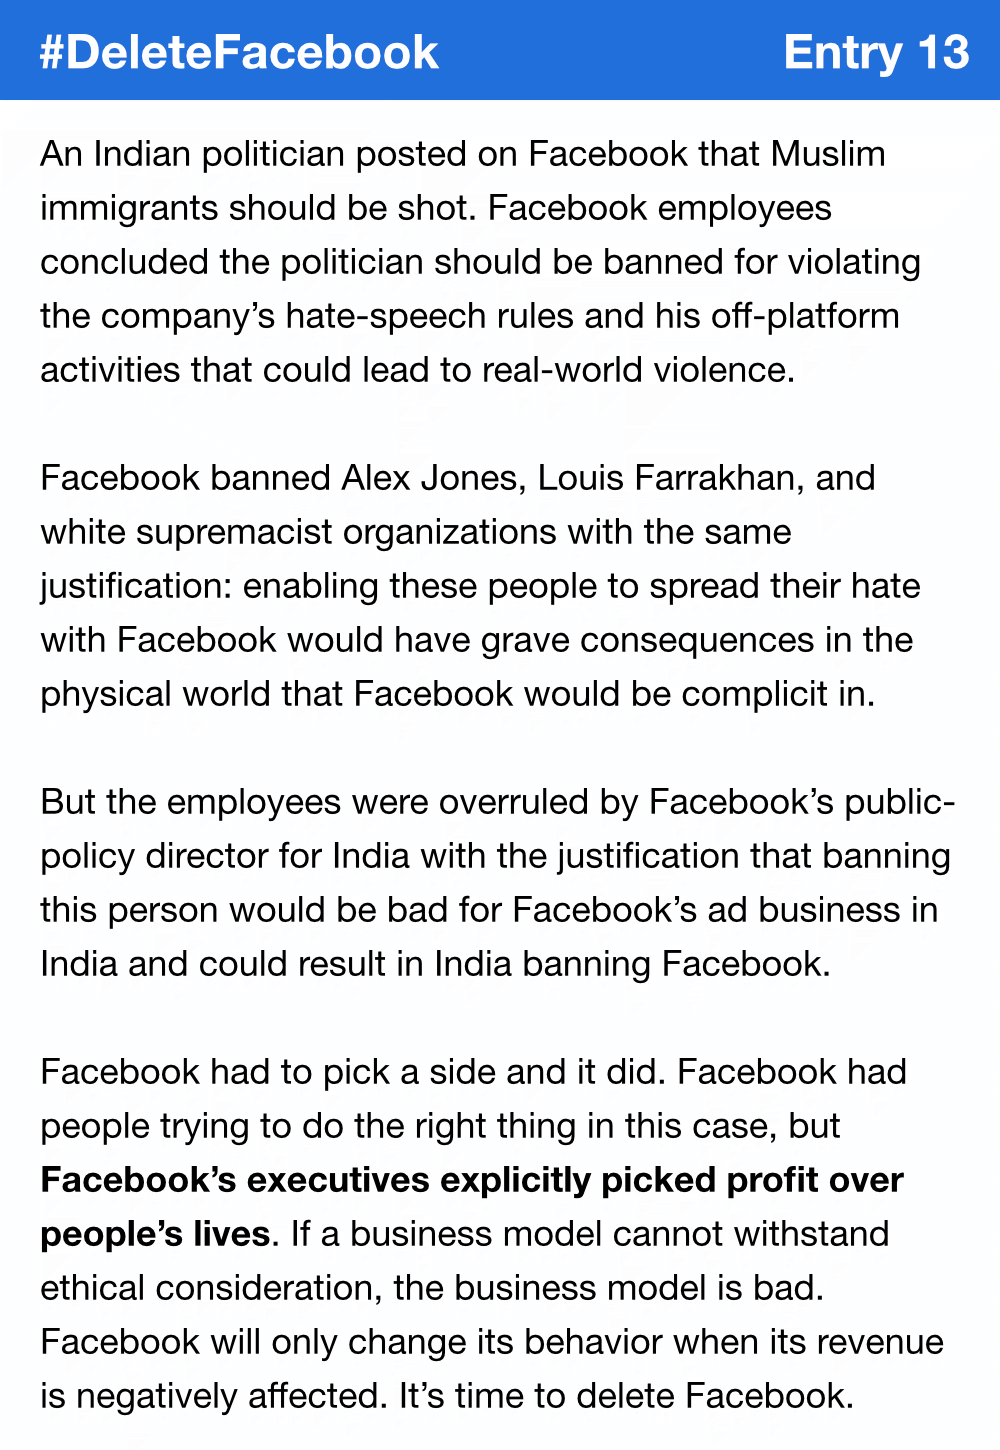 An Indian politician posted on Facebook that Muslim immigrants should be shot. Facebook employees concluded the politician should be banned for violating the company’s hate-speech rules and his off-platform activities that could lead to real-world violence. Facebook banned Alex Jones, Louis Farrakhan, and white supremacist organizations with the same justification: enabling these people to spread their hate with Facebook would have grave consequences in the physical world that Facebook would be complicit in. But the employees were overruled by Facebook’s public-policy director for India with the justification that banning this person would be bad for Facebook’s ad business in India and could result in India banning Facebook. Facebook had to pick a side and it did. Facebook had people trying to do the right thing in this case, but Facebook’s executives explicitly picked profit over people’s lives. If a business model cannot withstand ethical consideration, the business model is bad. Facebook will only change its behavior when its revenue is negatively affected. It’s time to delete Facebook.